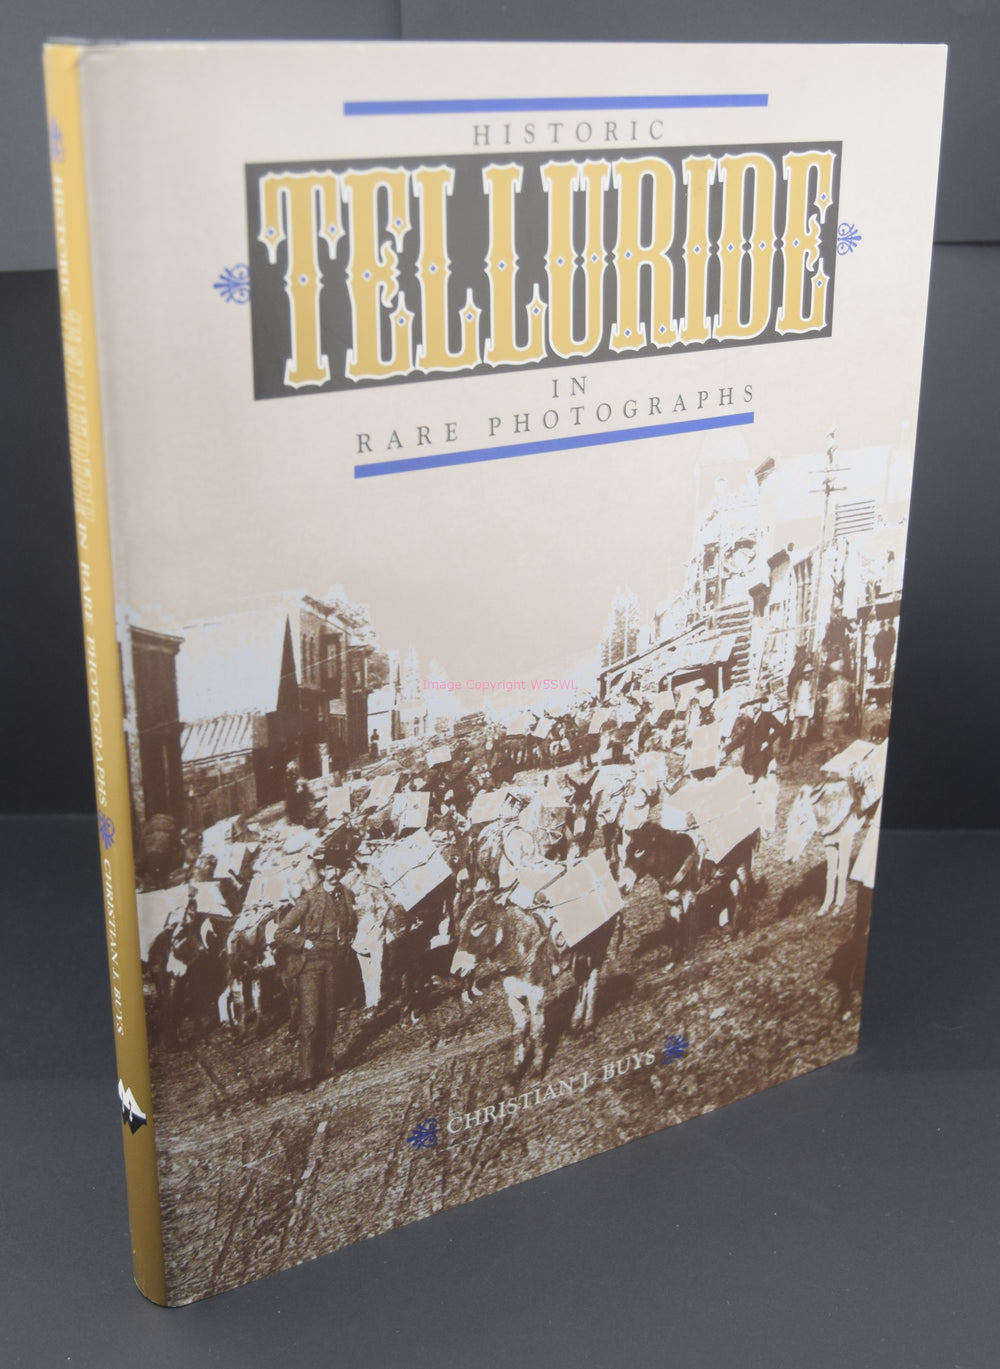 Historic Telluride in Rare Photographs by Christian Buys - Dave's Hobby Shop by W5SWL